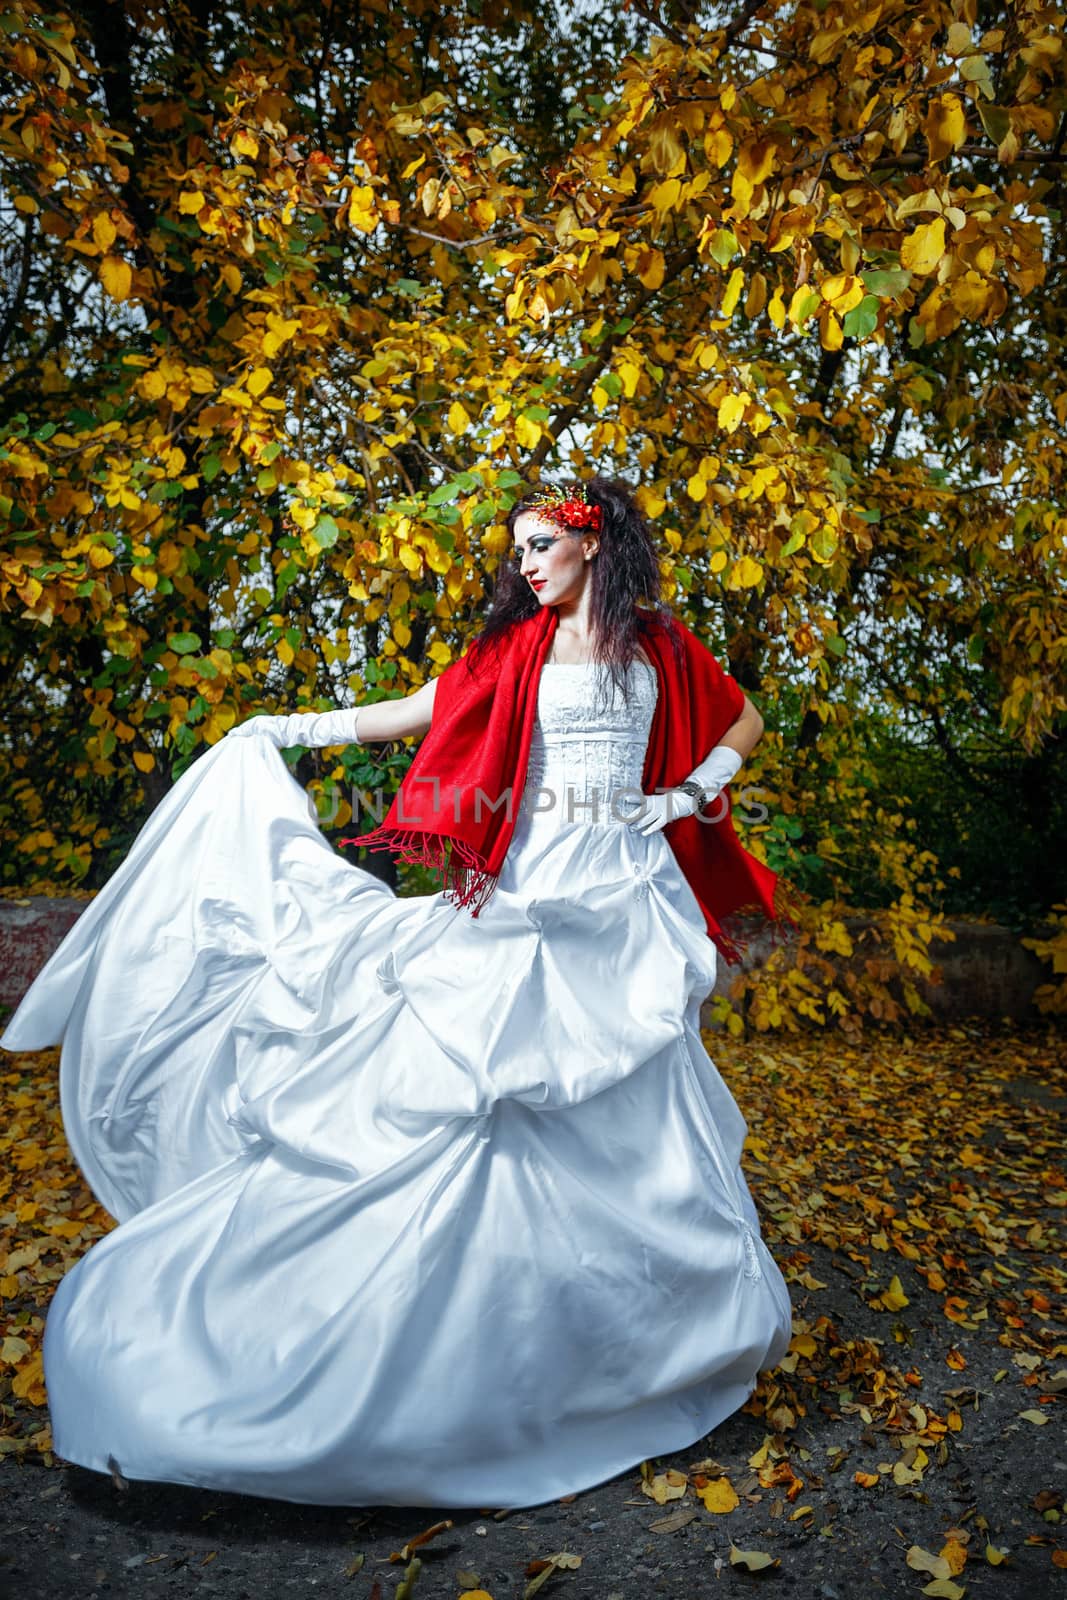 Attractive bride in a wedding dress with bright makeup, red shawl